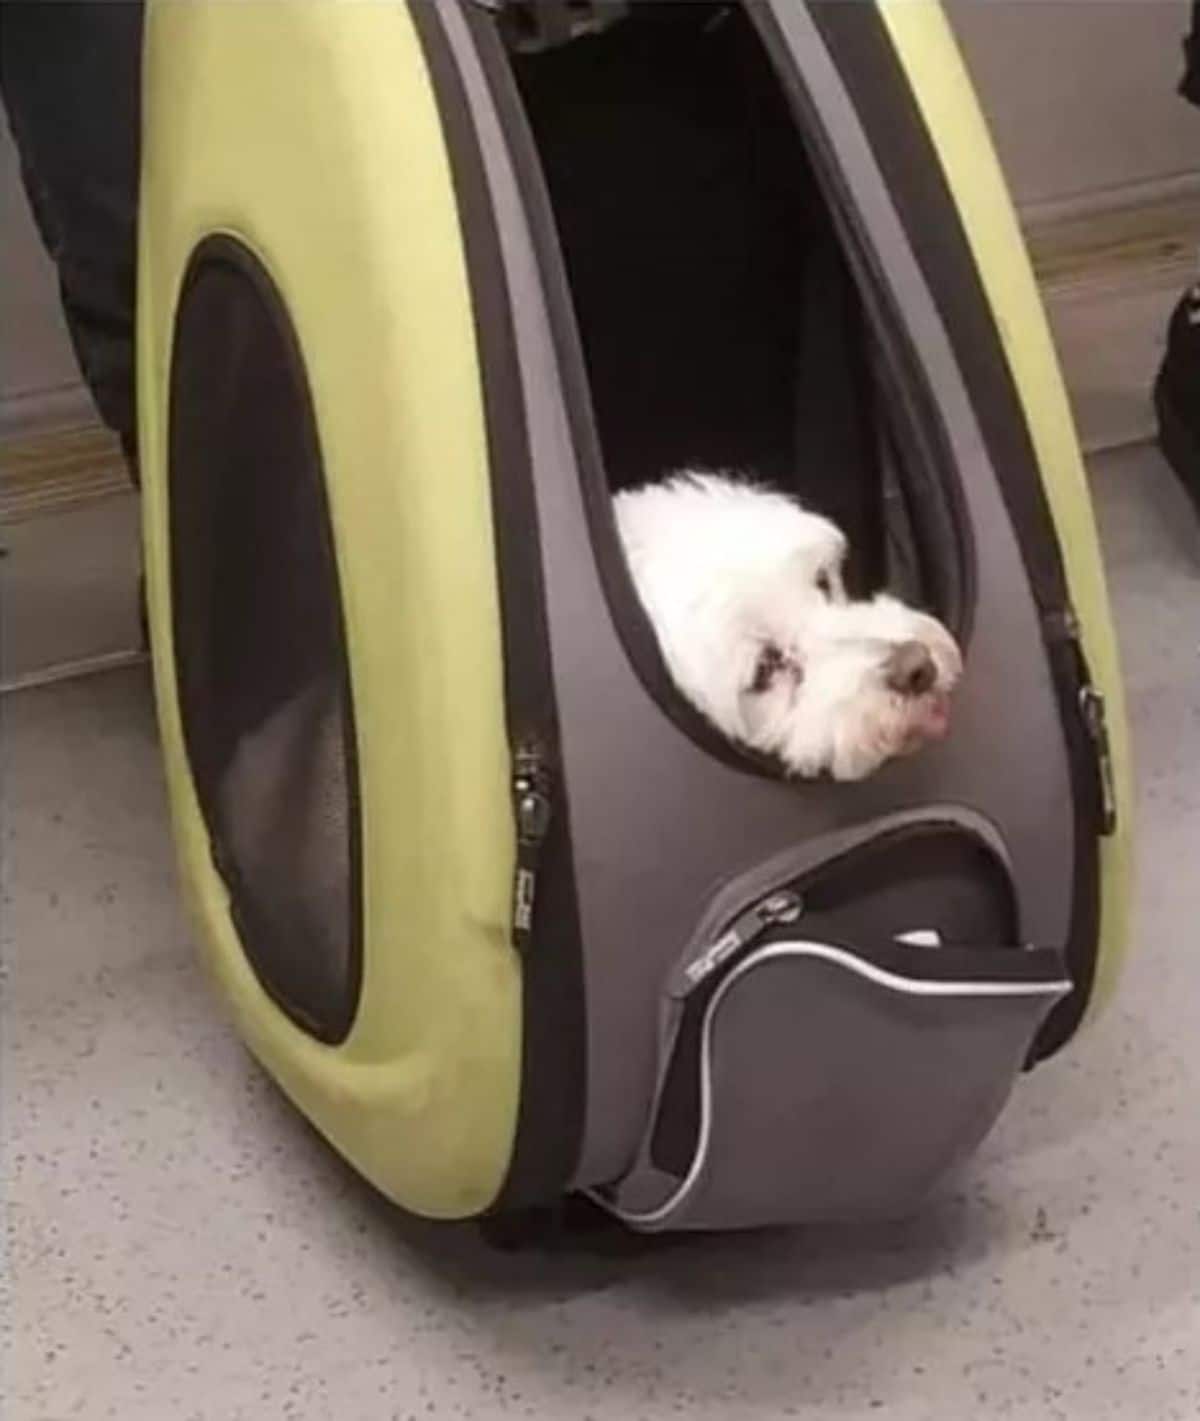 small fluffy white dog with the head peeking out of a green grey and black dog carrier on the floor of a train